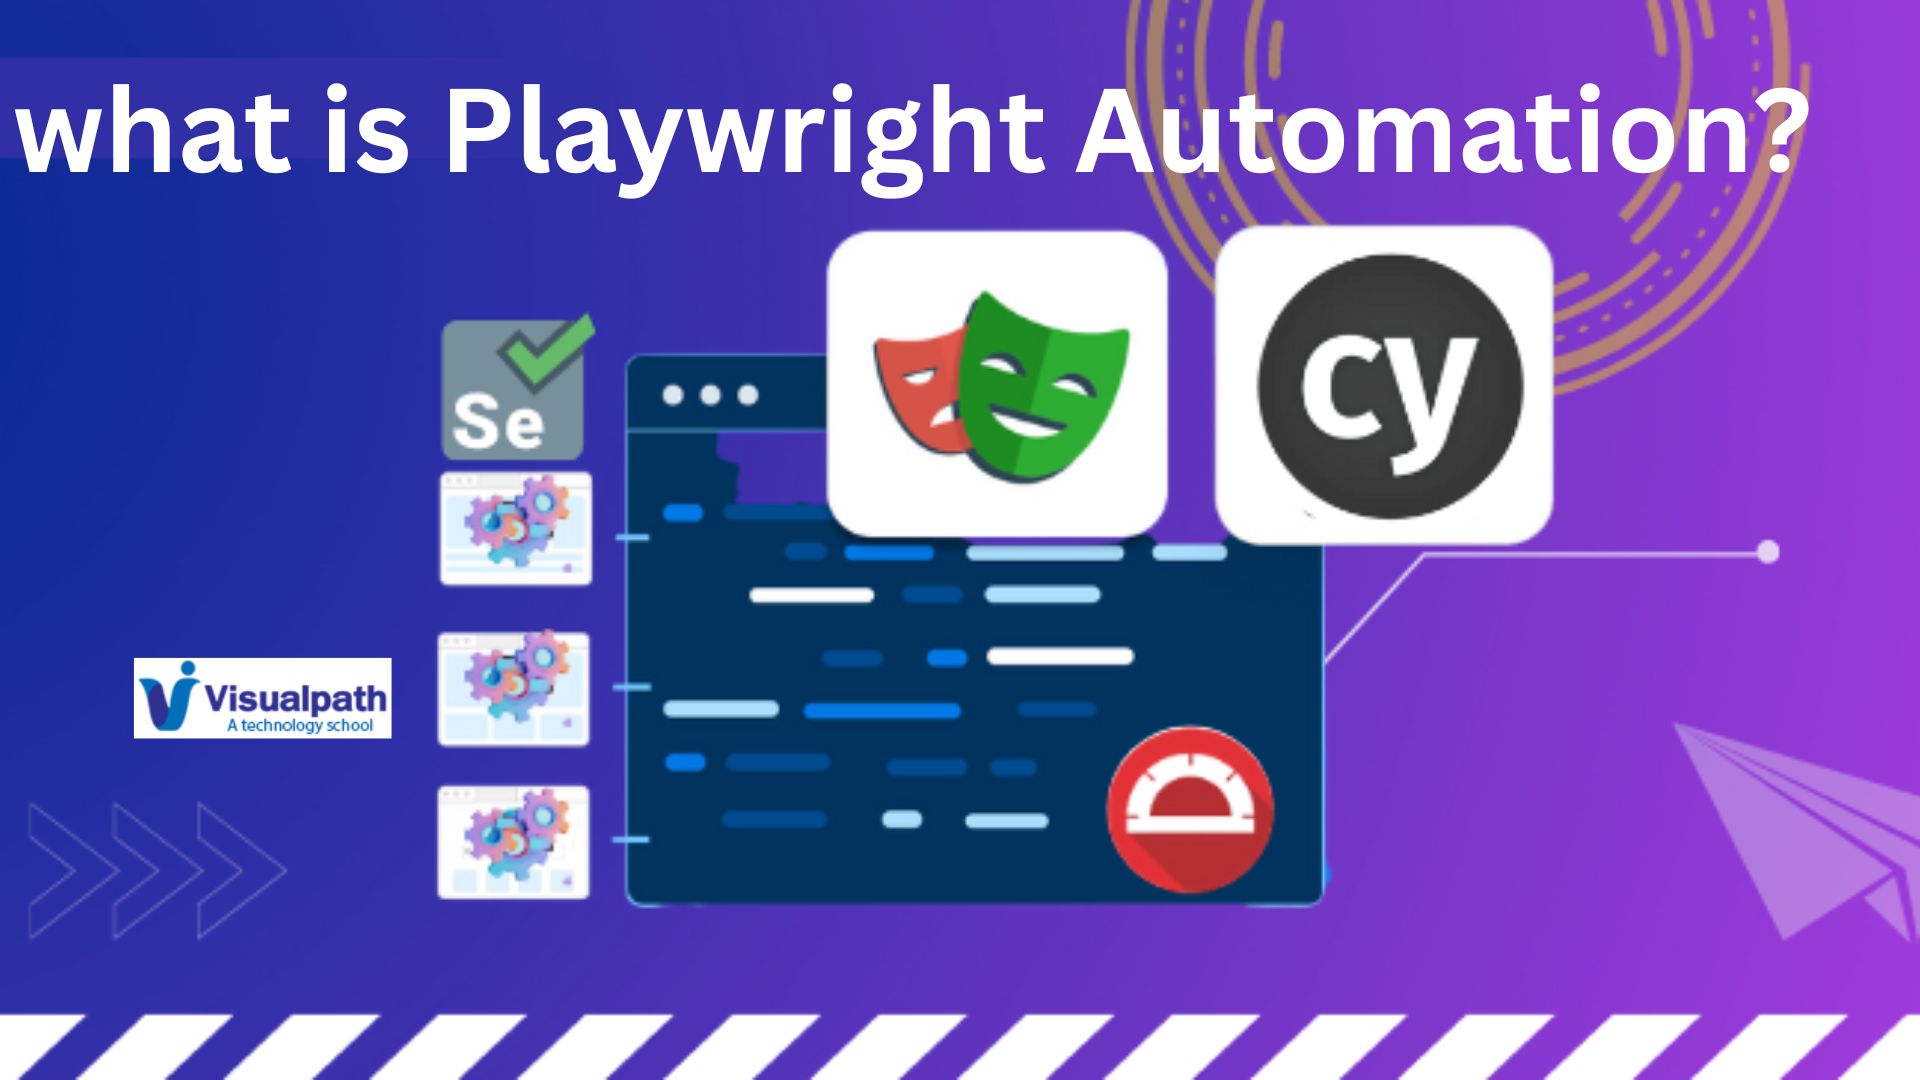 What is Playwright Automation? Exploring Playwright Automation for Workflows